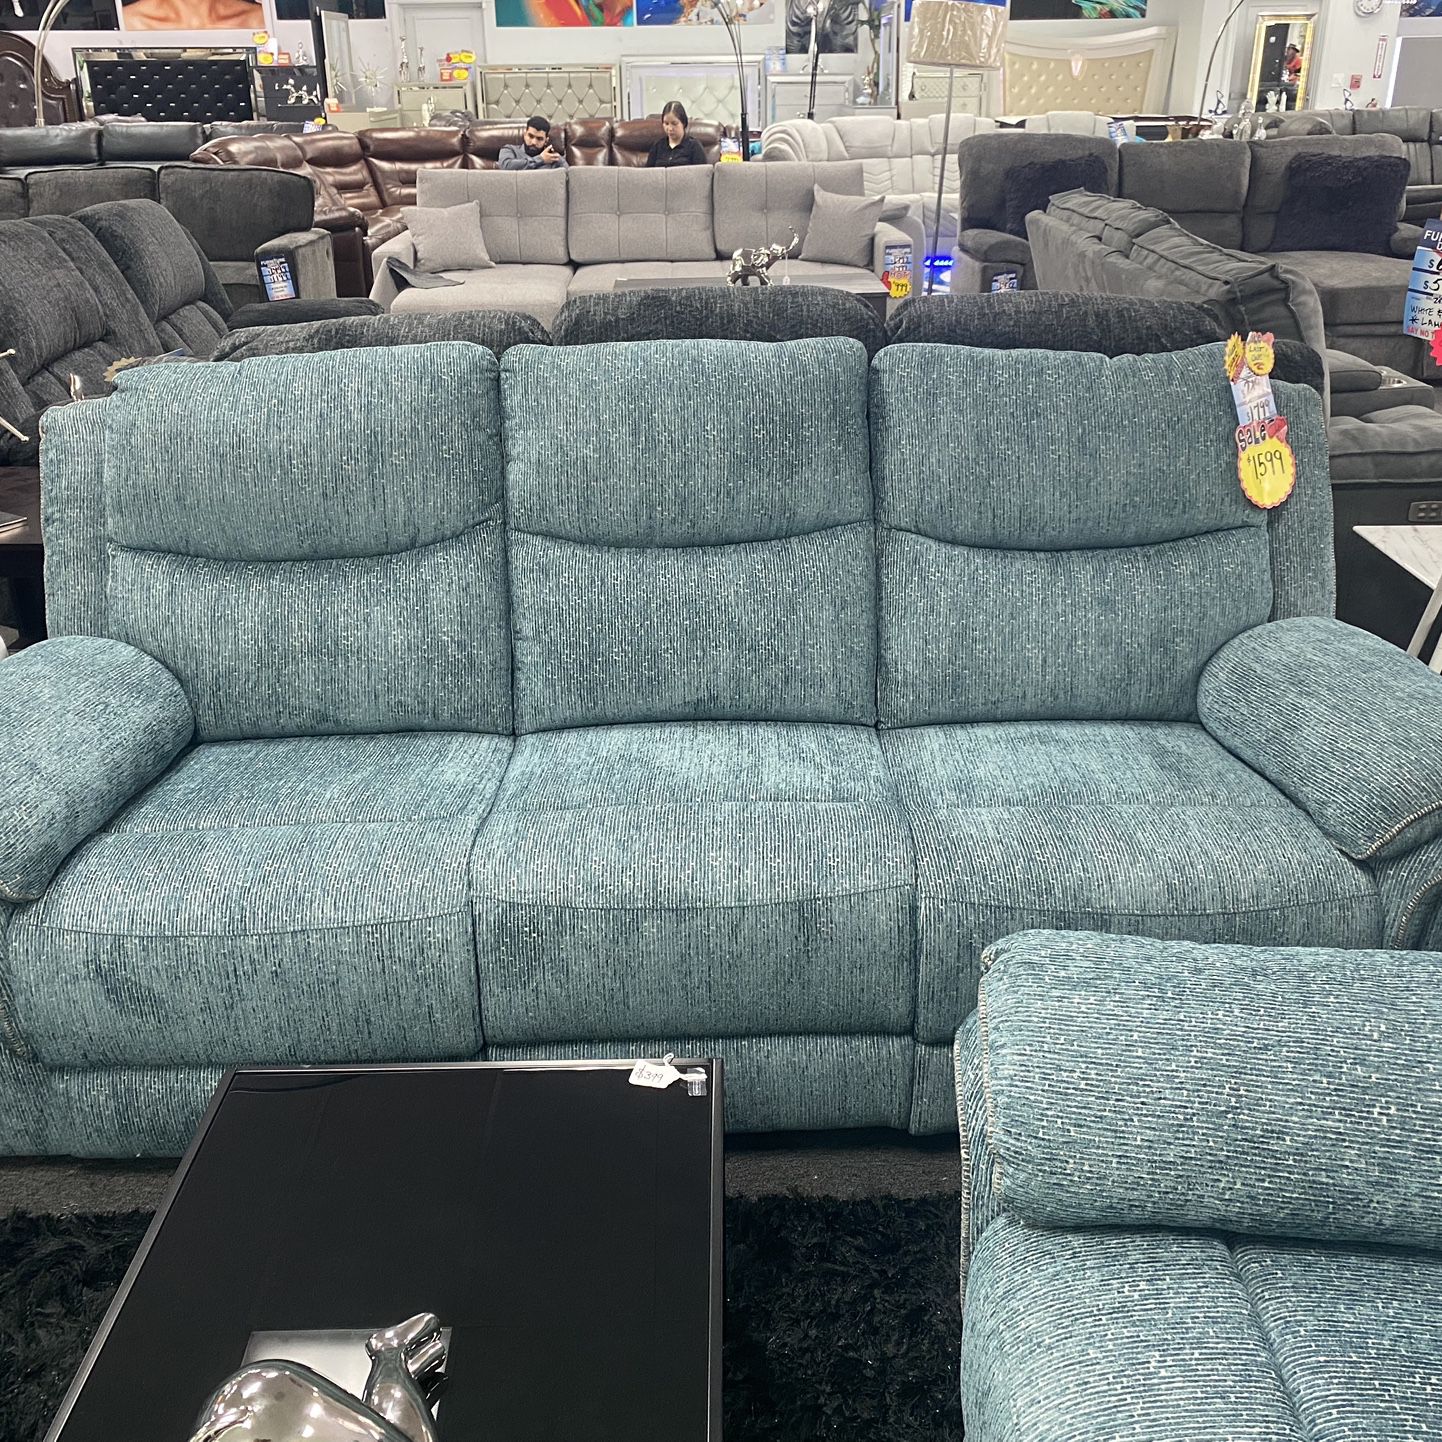 GREAT DEAL! Beautiful Aqua Blue Sofa, Love Seat, And Chair Only For 1599